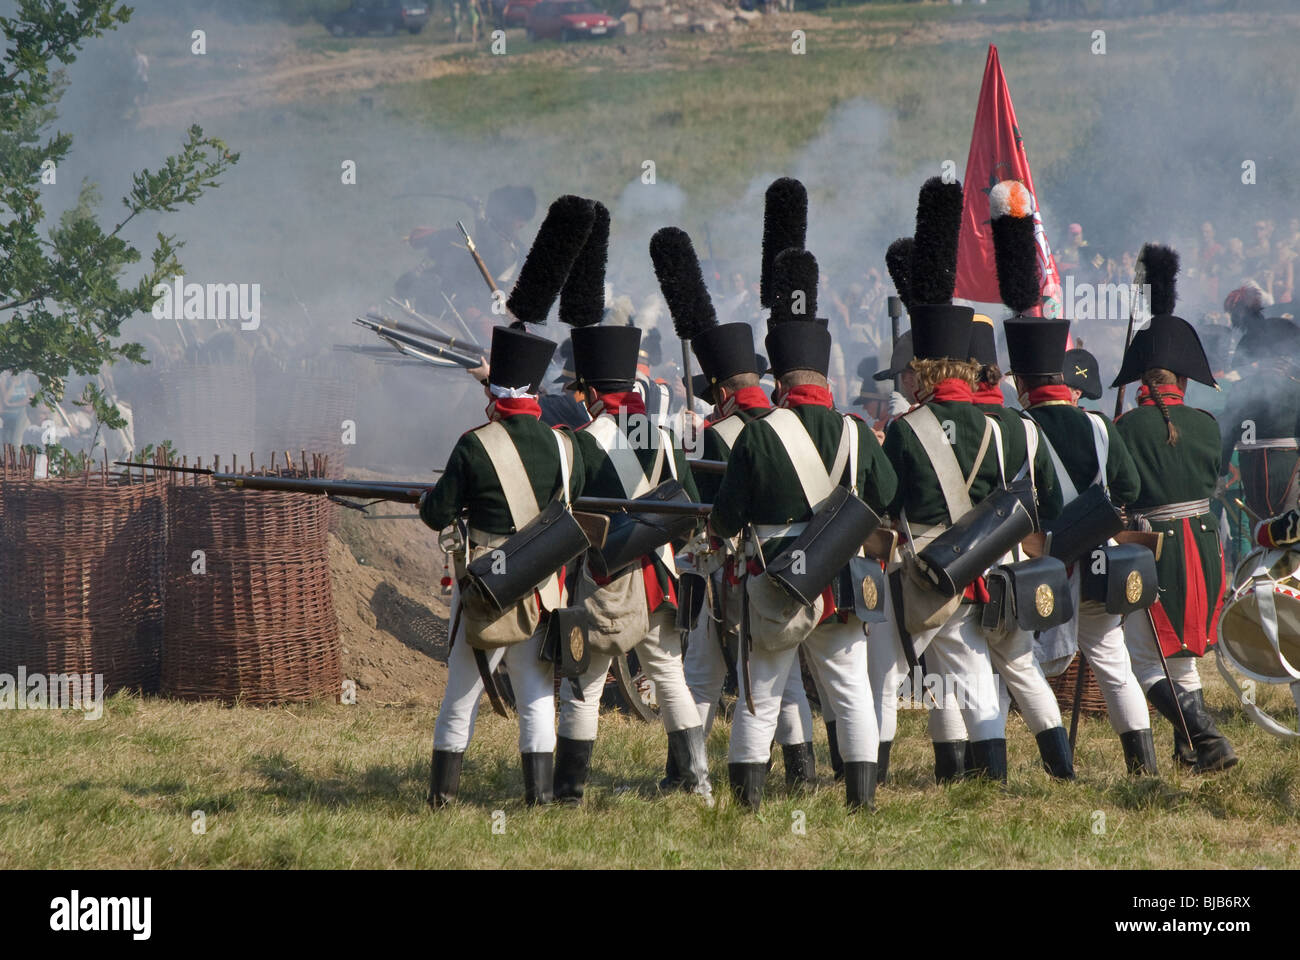 Reenactment of the Siege of Neisse during Napoleonic War with Prussia in 1807 at Nysa, Opolskie, Poland Stock Photo